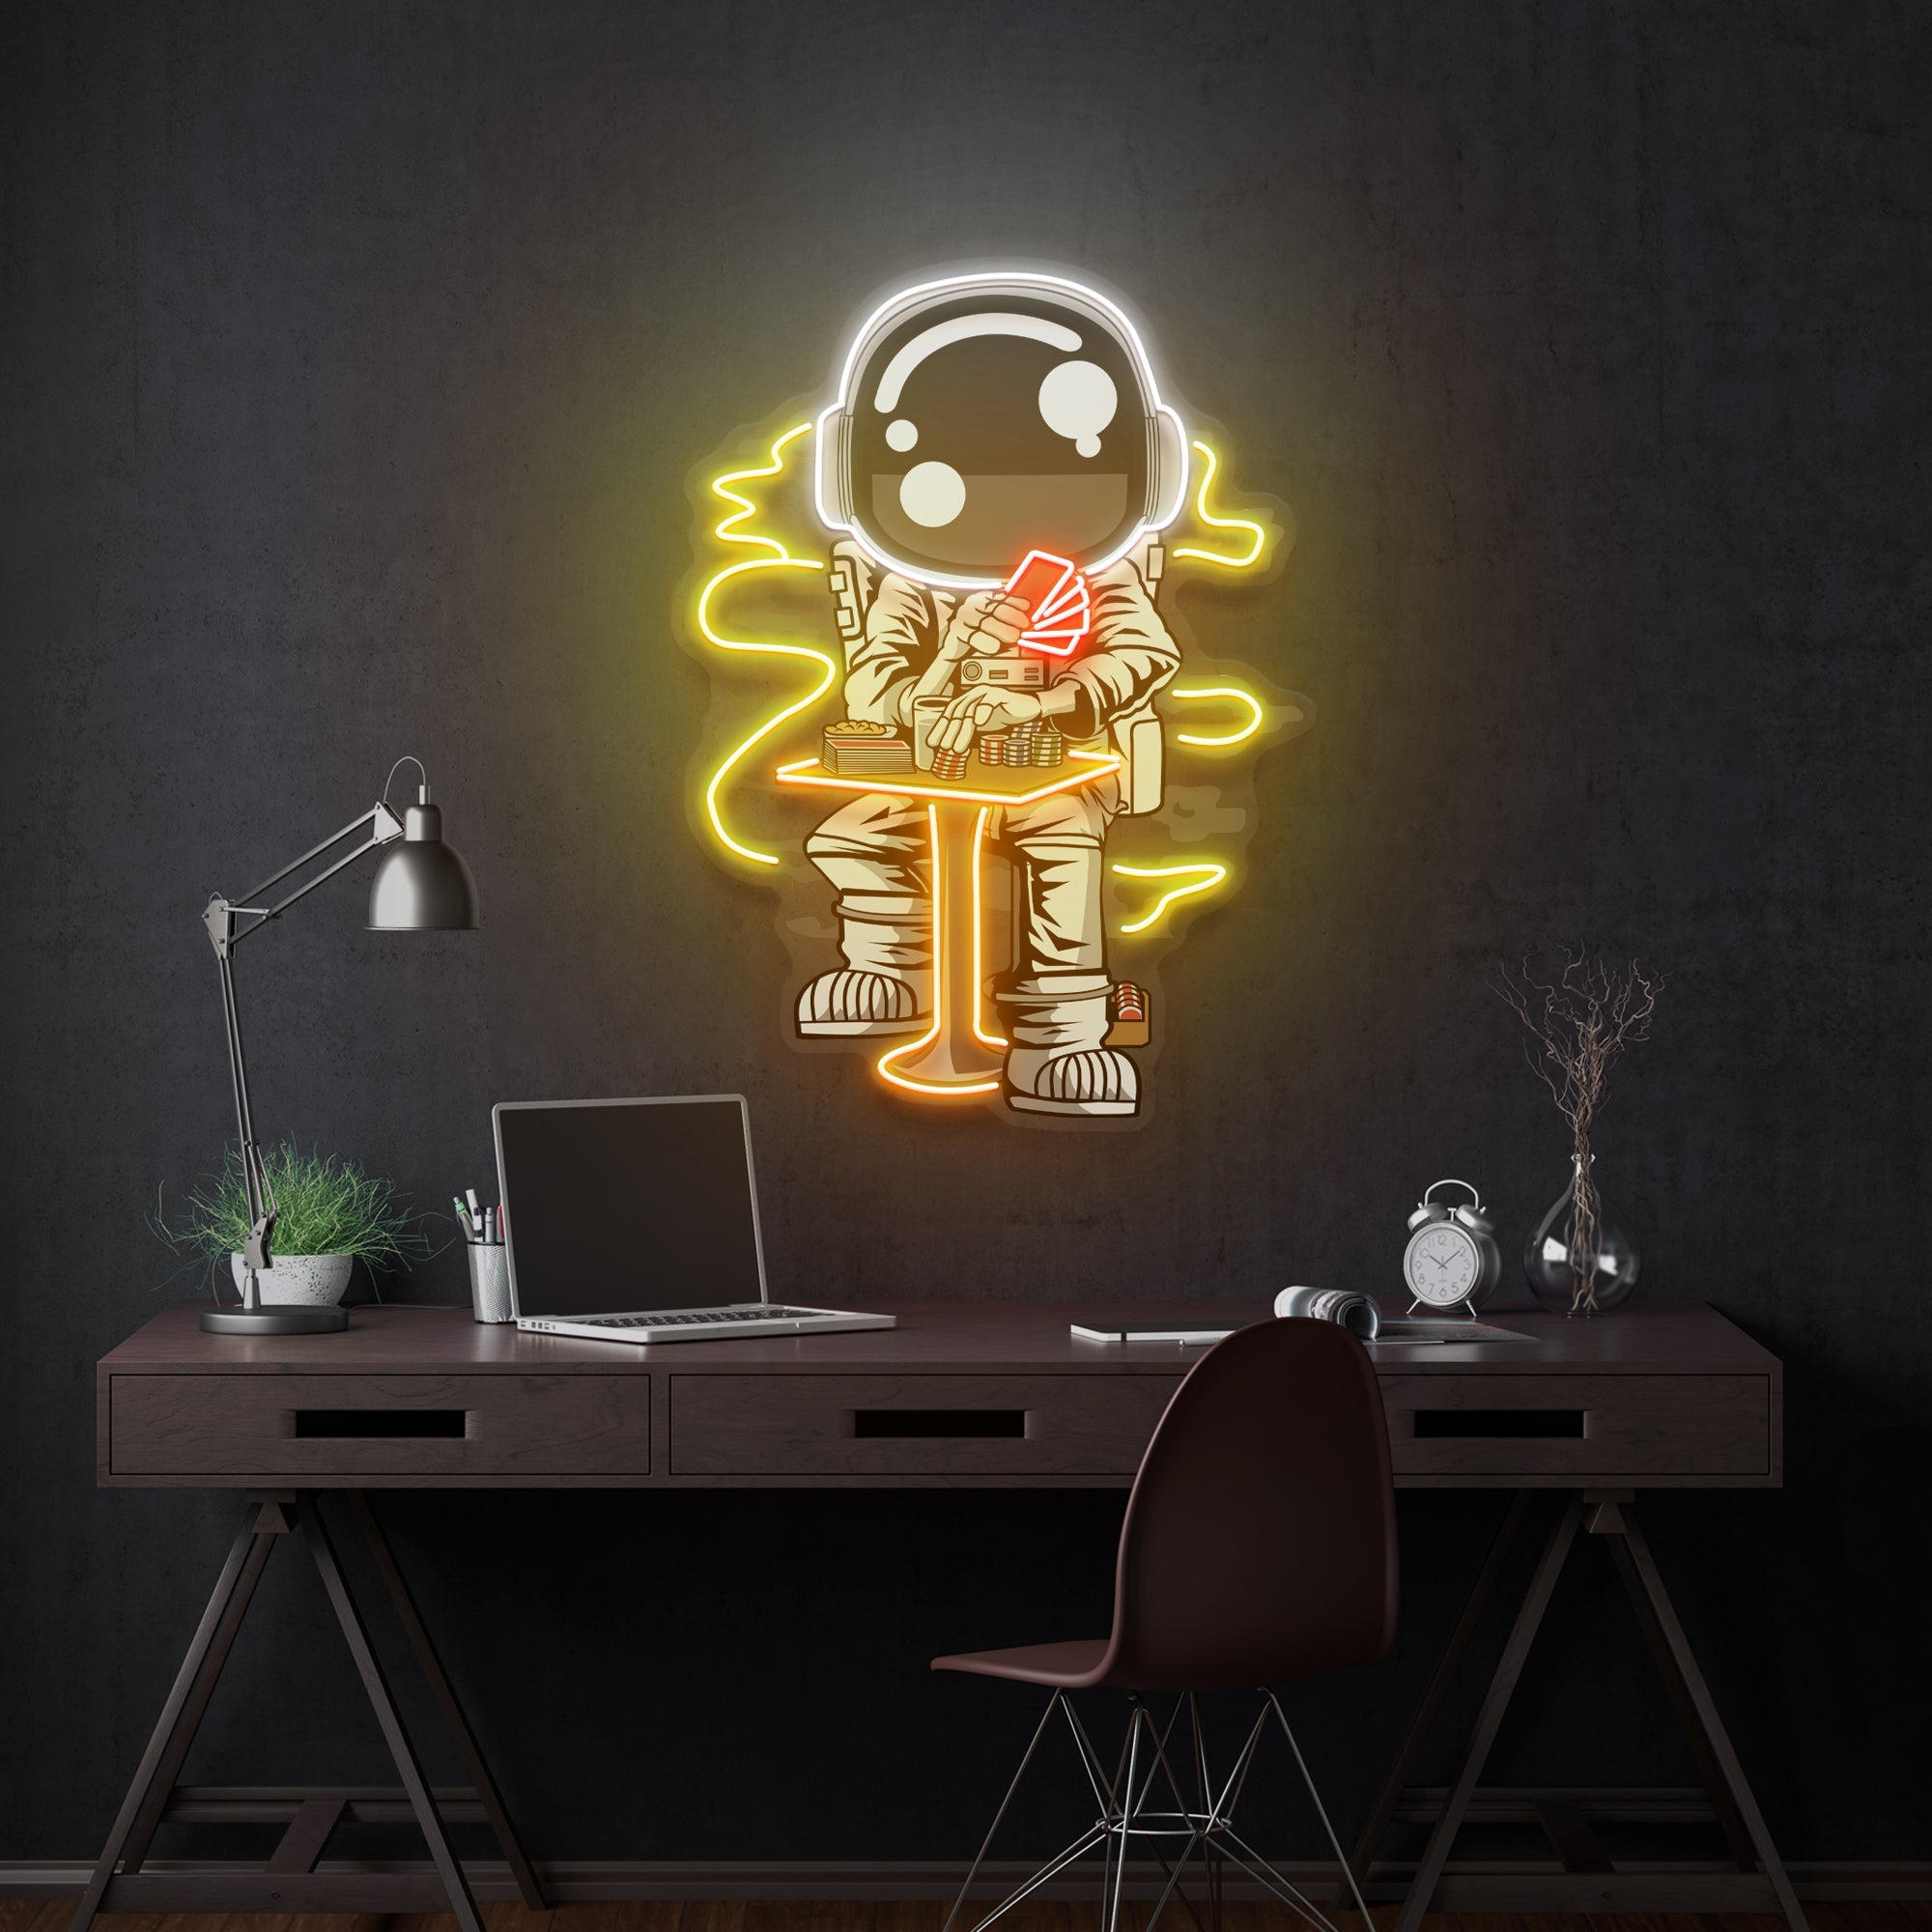 Astronaut Playing A Game Of Poker In Space Artwork Led Neon Sign Light - Neonbir